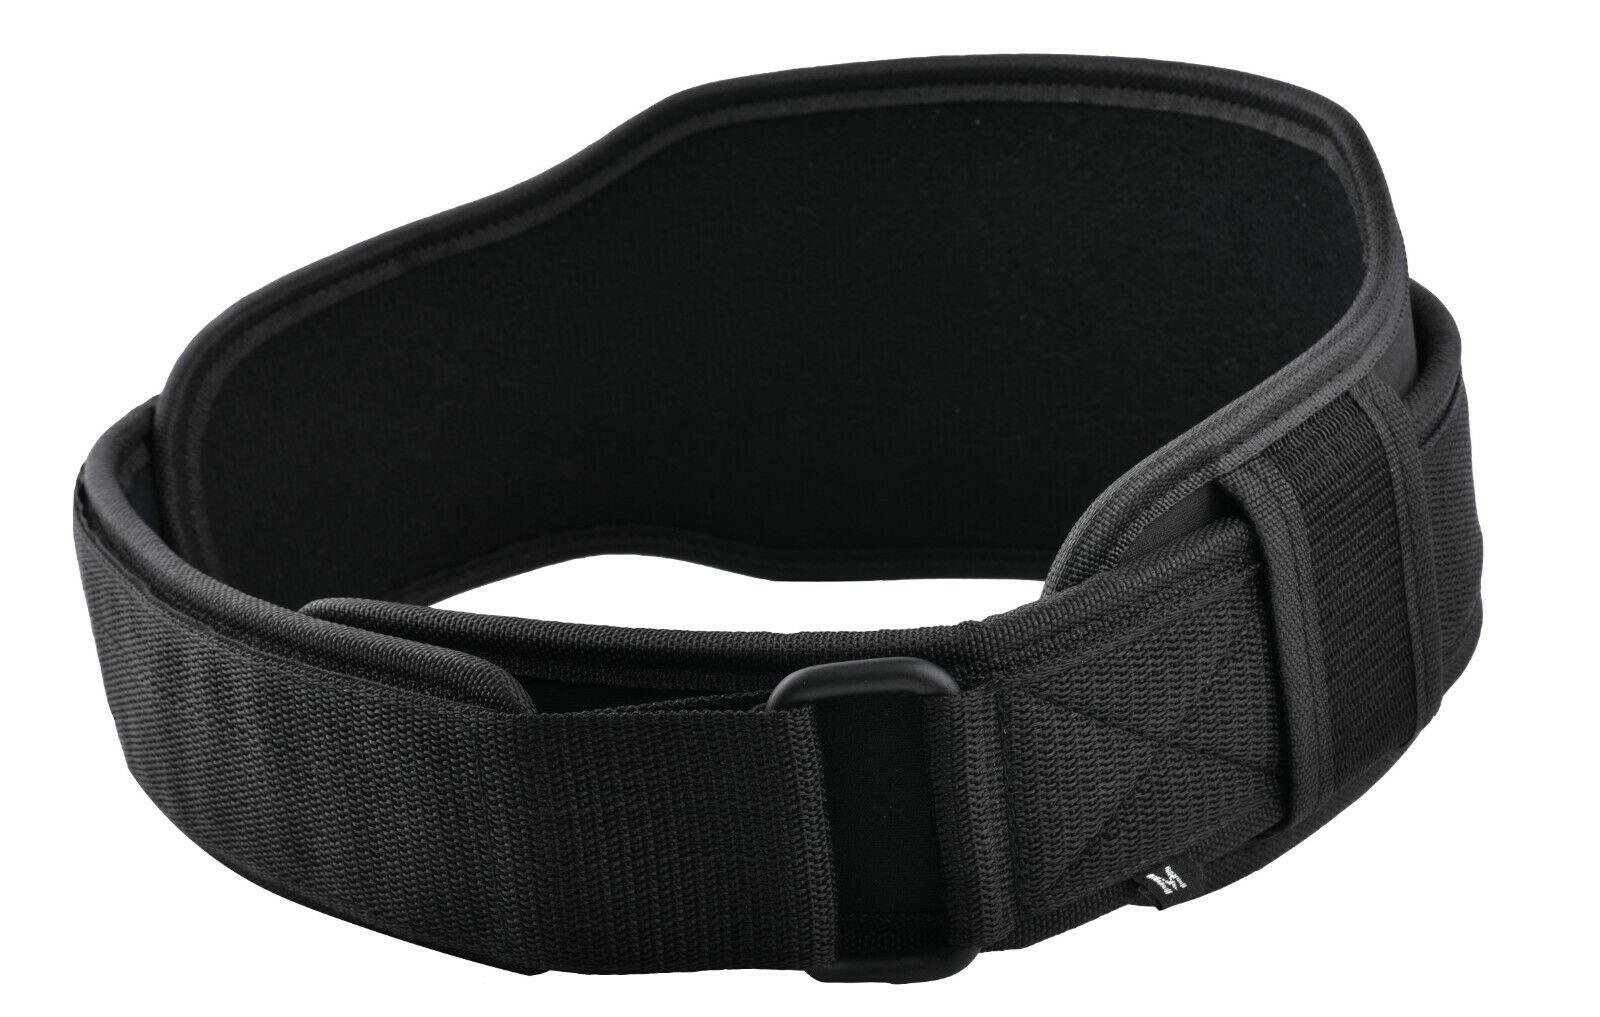 Large Black Weight Lifting Belt Gym Training Neoprene Fitness Workout Double Support